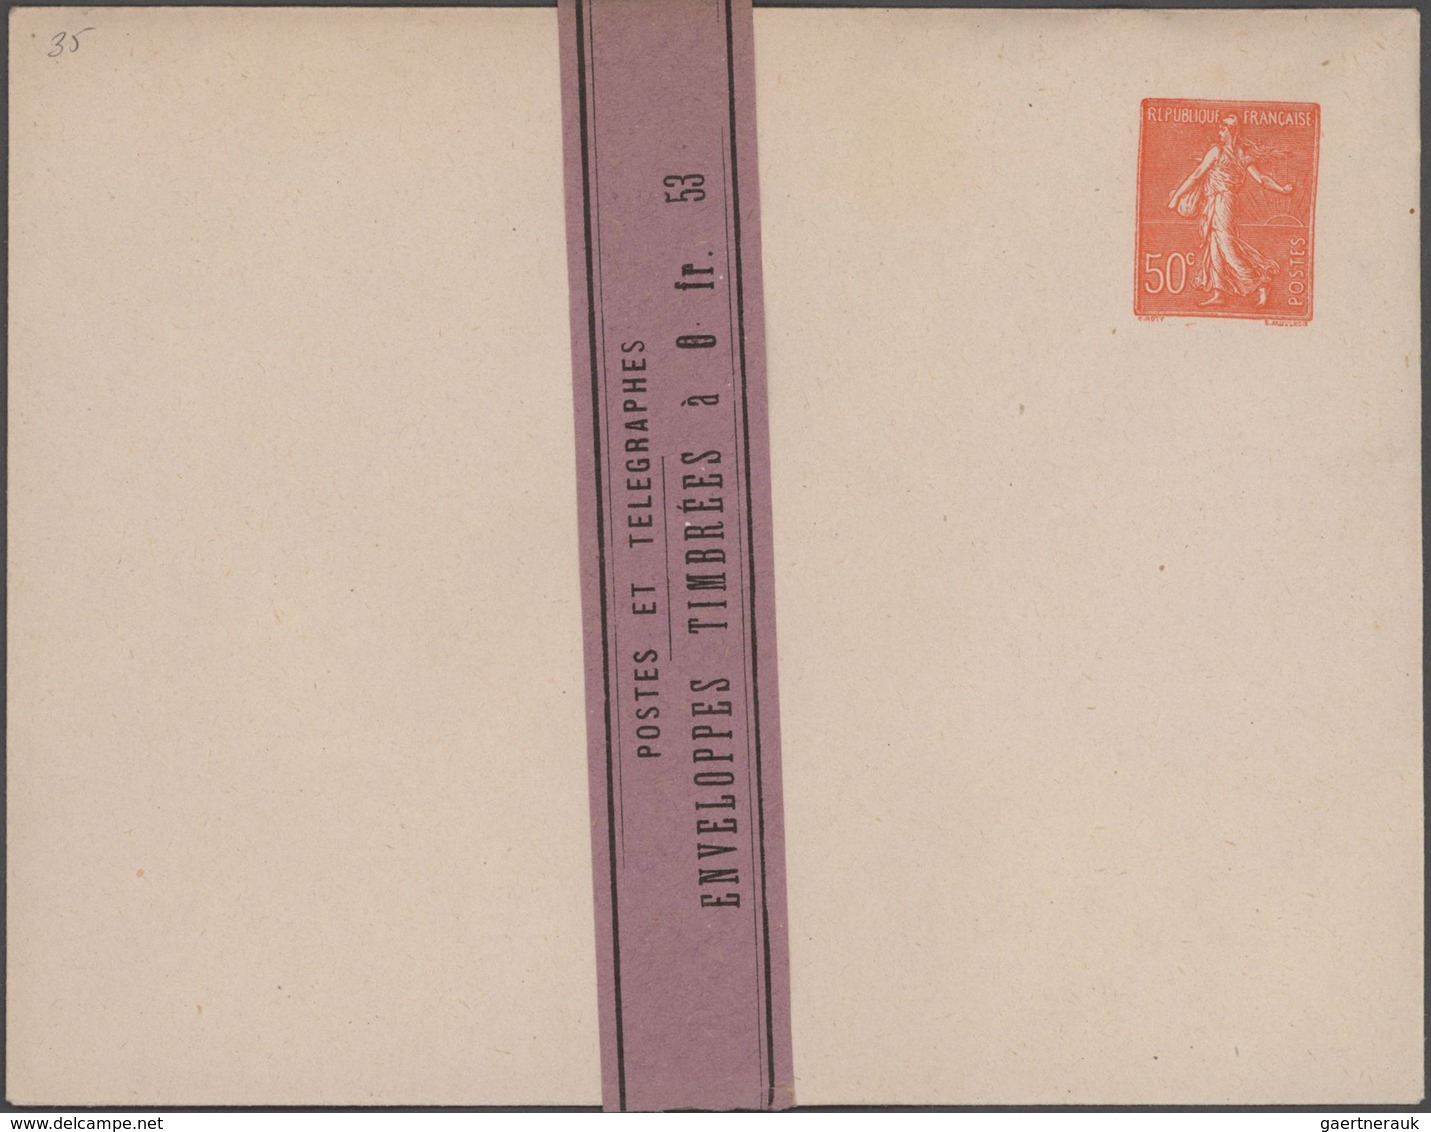 Frankreich - Ganzsachen: 1870/1935 Collection of about 270 unused and used postal stationeries in la